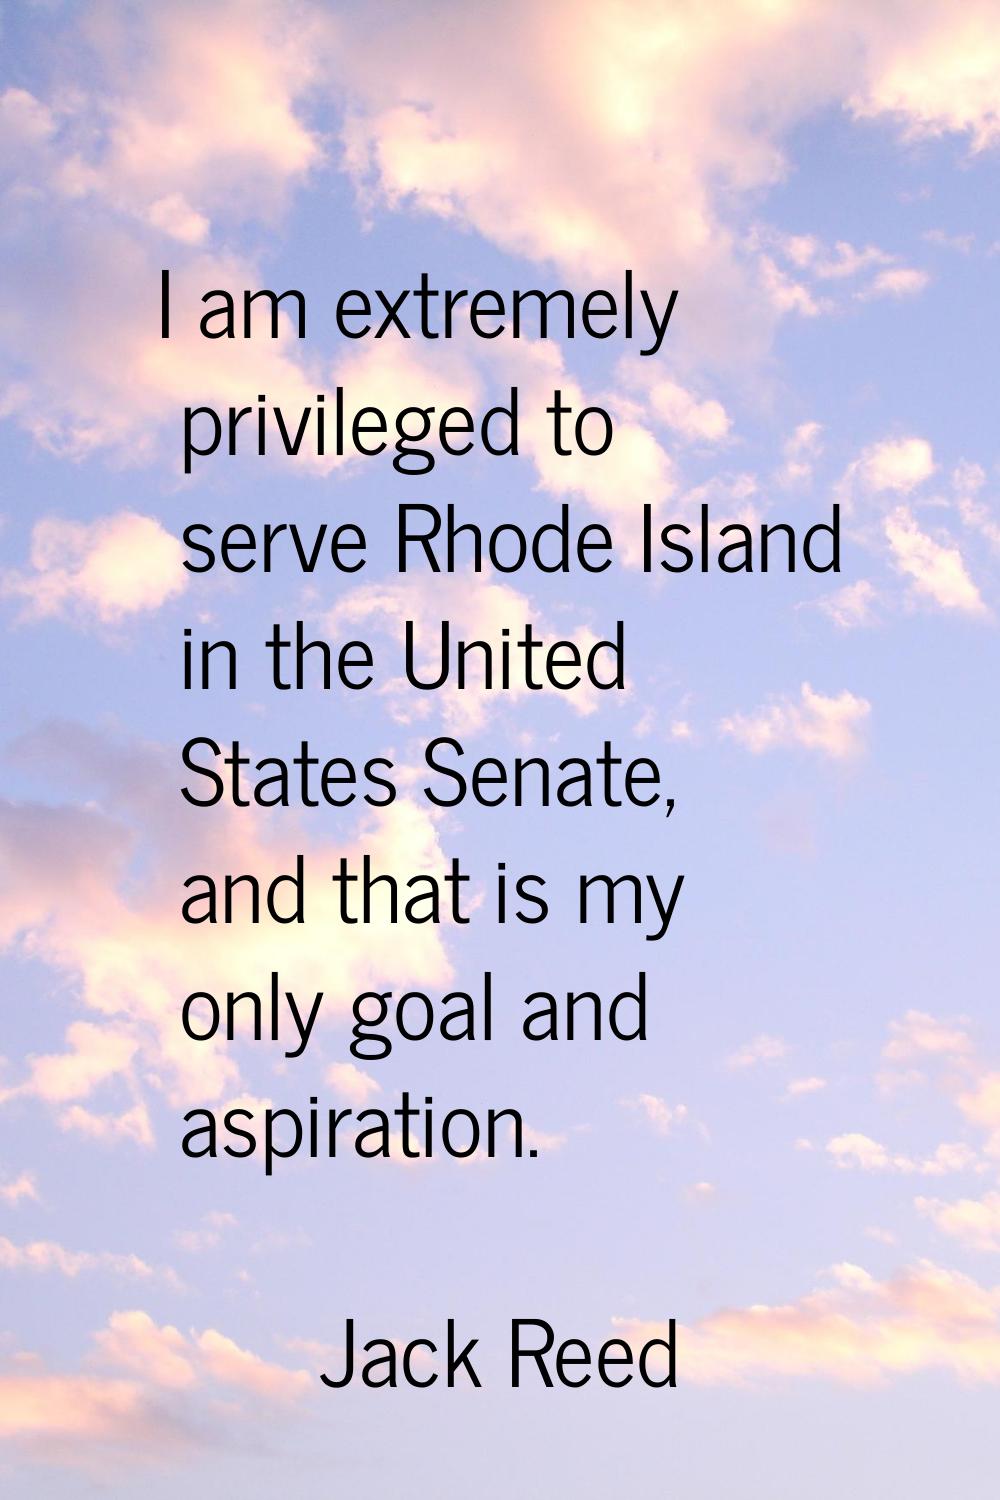 I am extremely privileged to serve Rhode Island in the United States Senate, and that is my only go